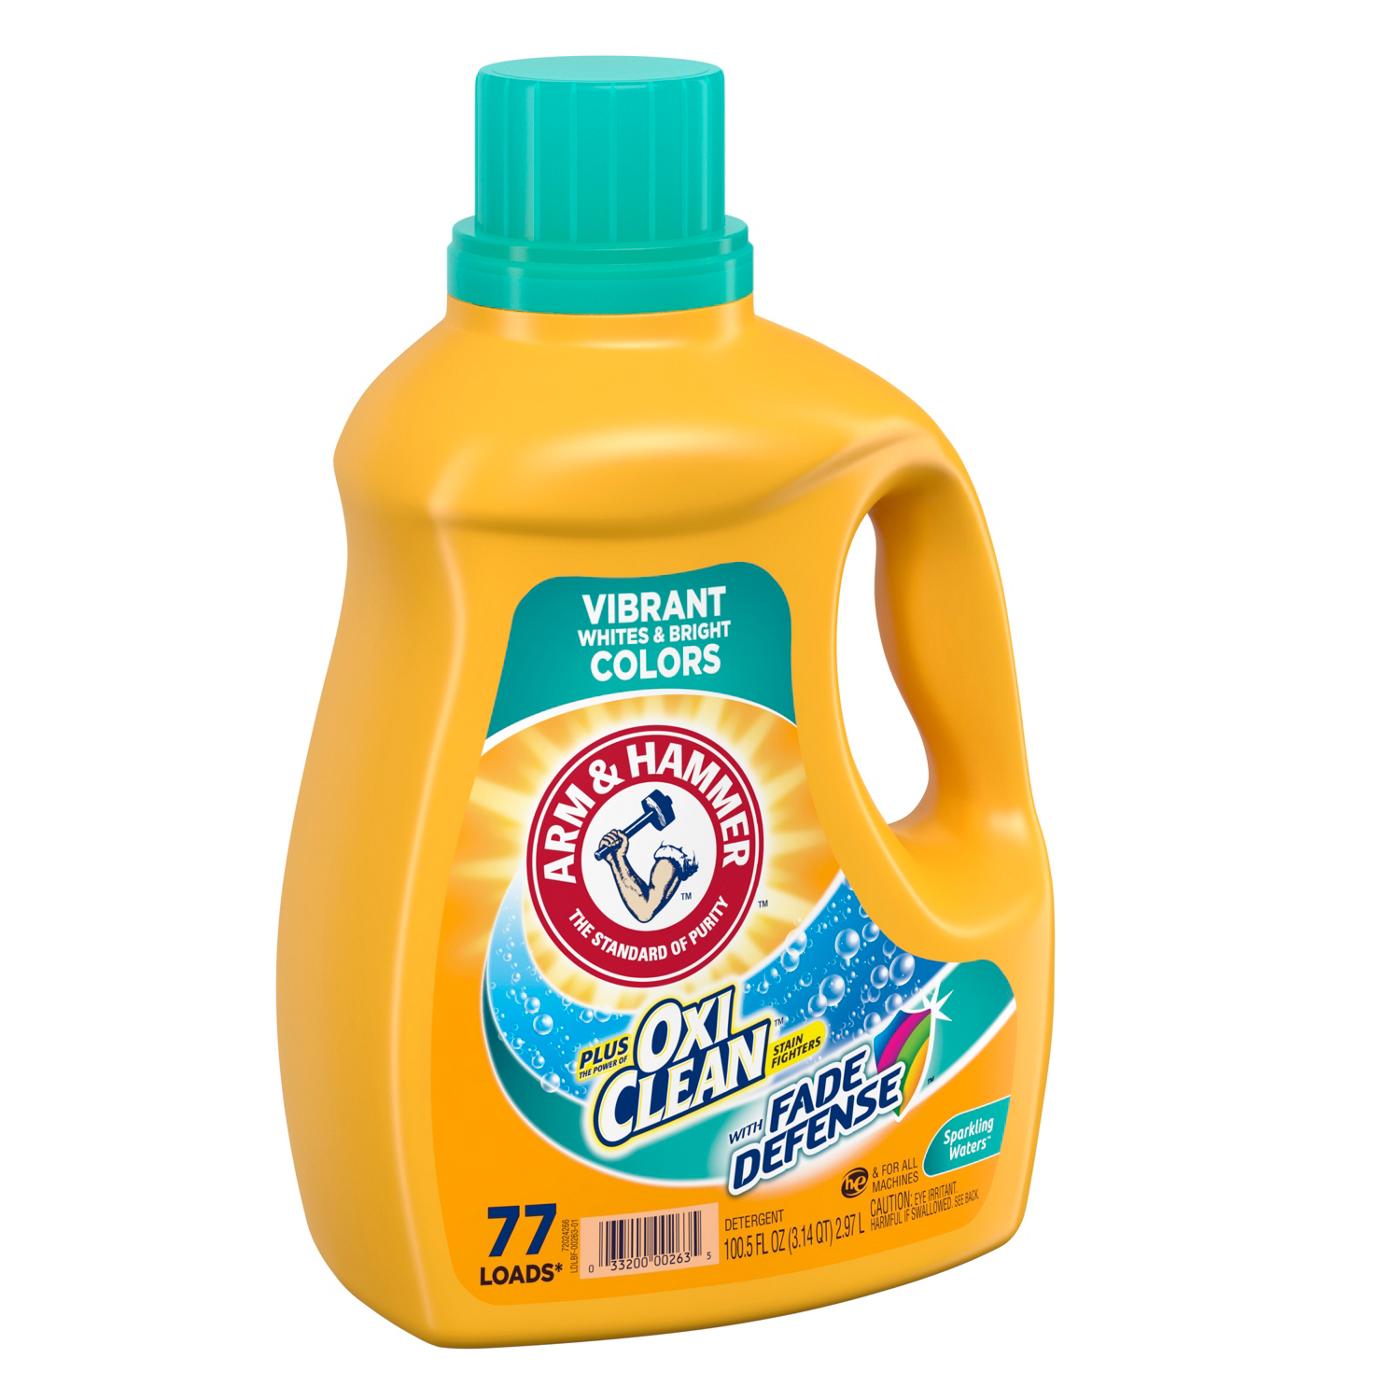 Arm & Hammer Plus OxiClean Sparkling Waters HE Liquid Laundry Detergent 77 Loads; image 2 of 3